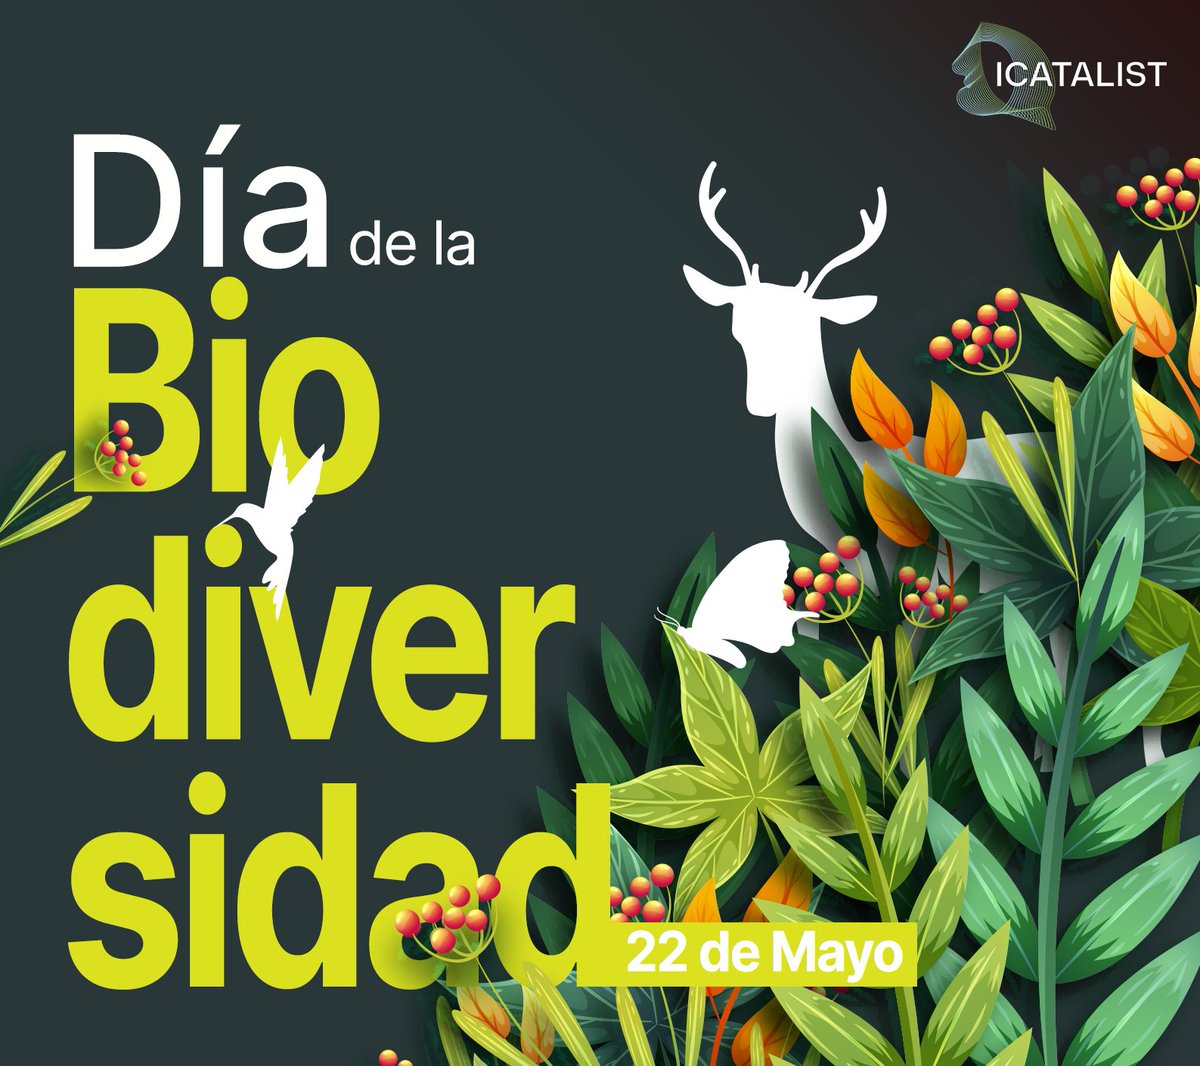 🌿 On the Biodiversity Day, let's celebrate the variety of life on our planet and renew our commitment to its protection and restoration. Let's work together for a sustainable future for all species! 🌍 #BiodiversityDay #SustainableRecovery #ICATALIST